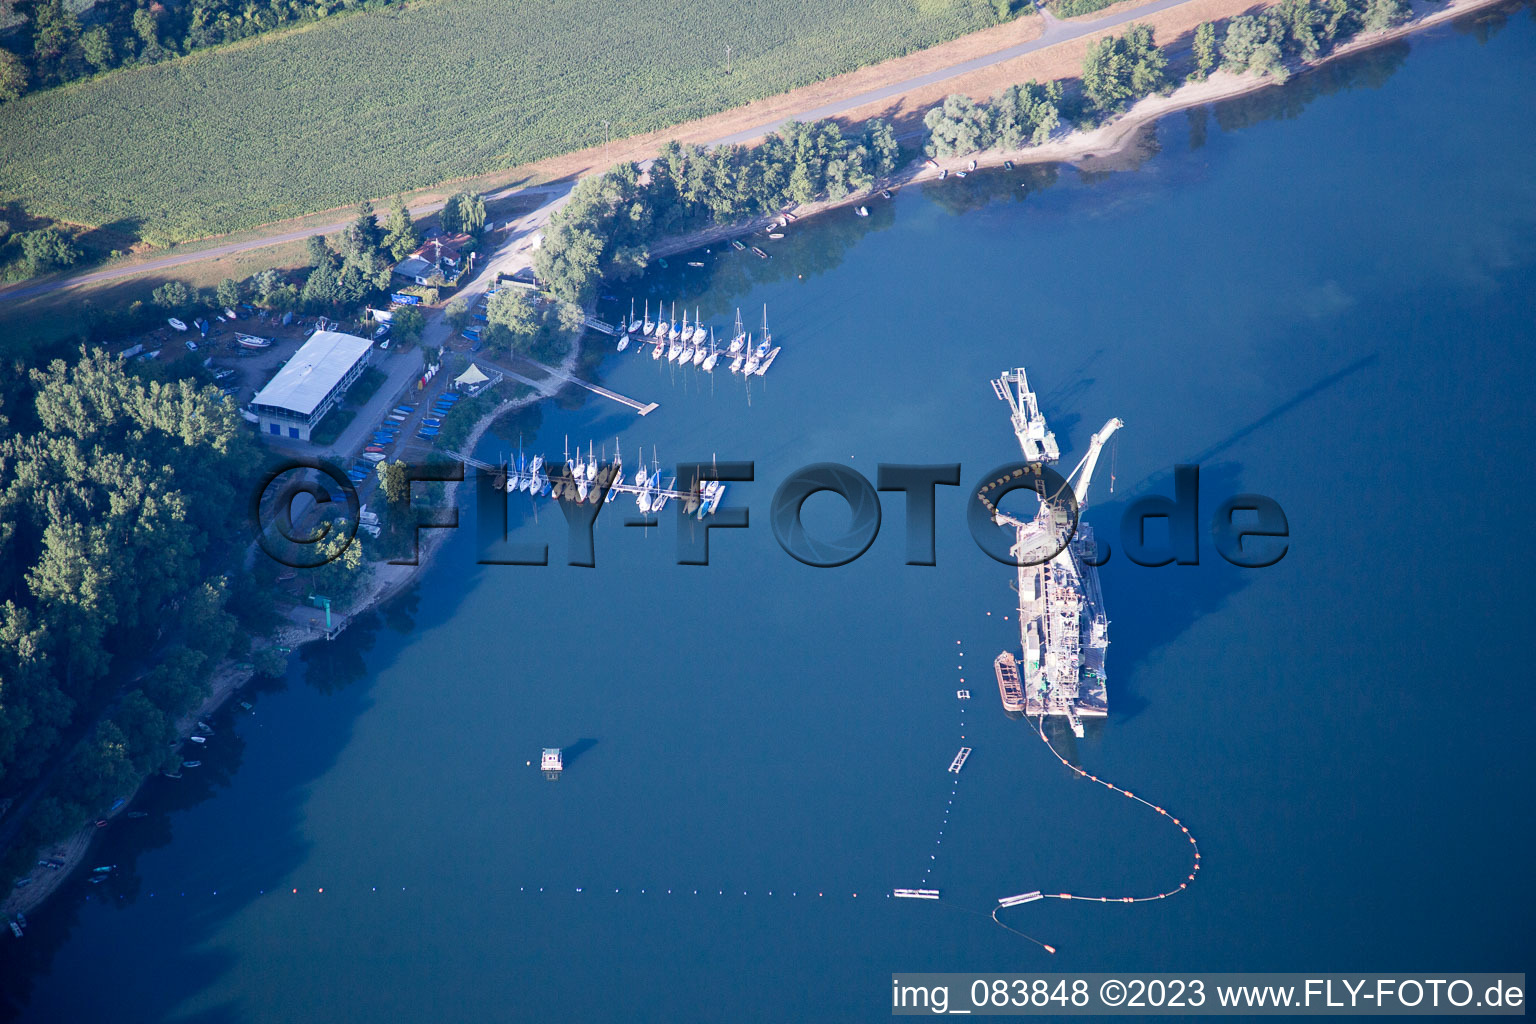 Aerial photograpy of Harbor in the district Maximiliansau in Wörth am Rhein in the state Rhineland-Palatinate, Germany